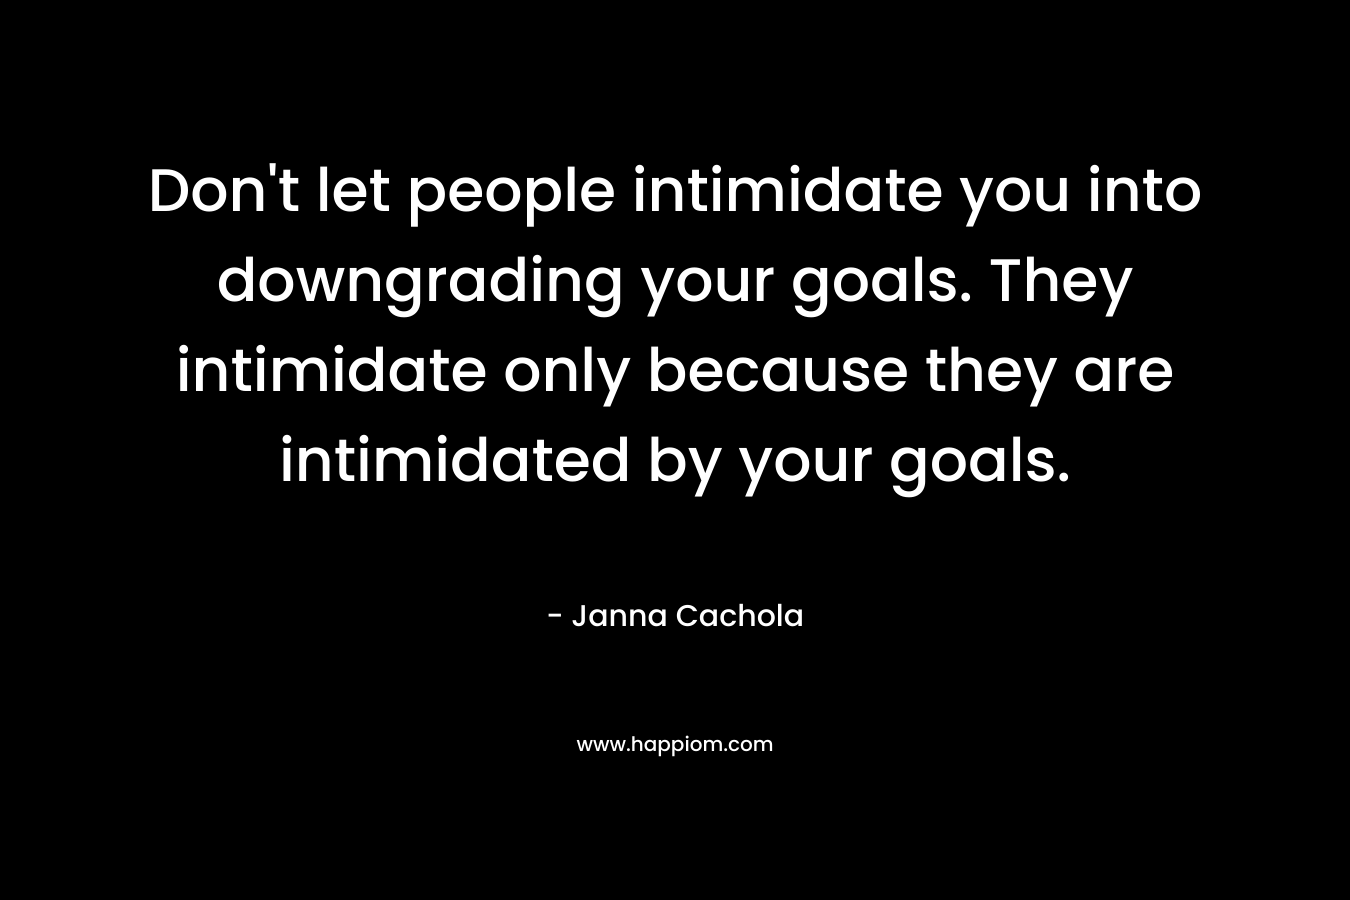 Don’t let people intimidate you into downgrading your goals. They intimidate only because they are intimidated by your goals. – Janna Cachola